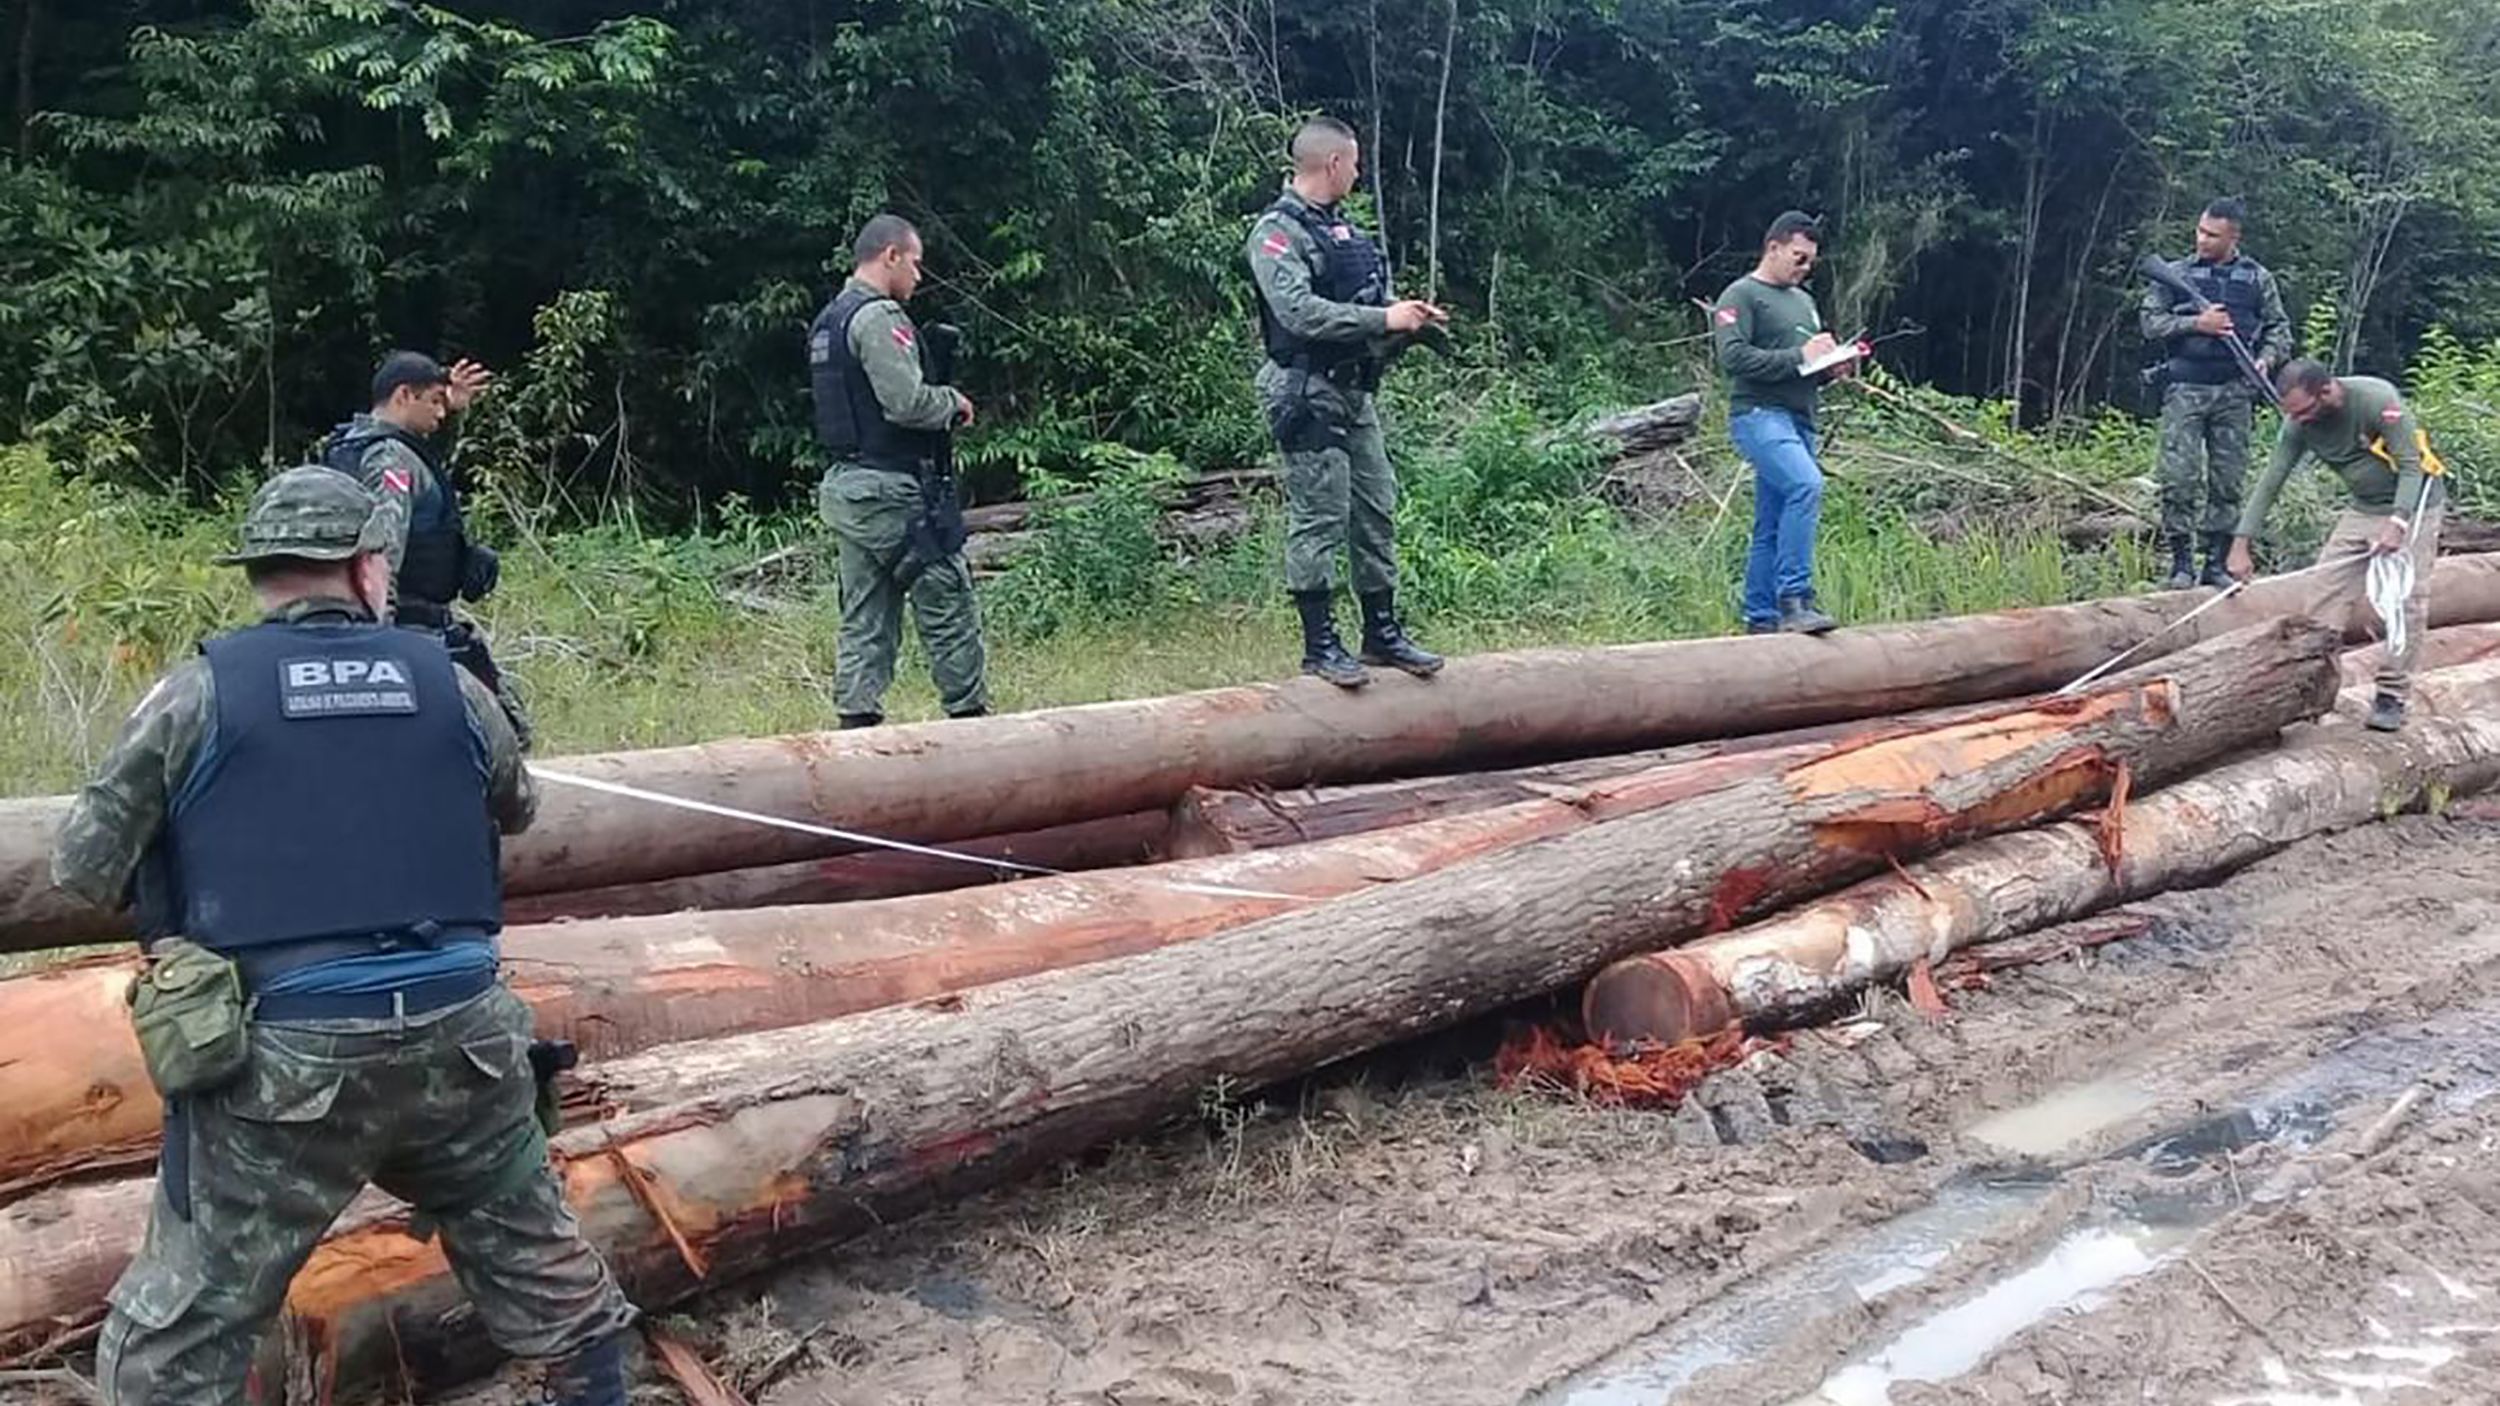 Wood illegally removed from a reserve in Para, Brazil on February 20, 2020.